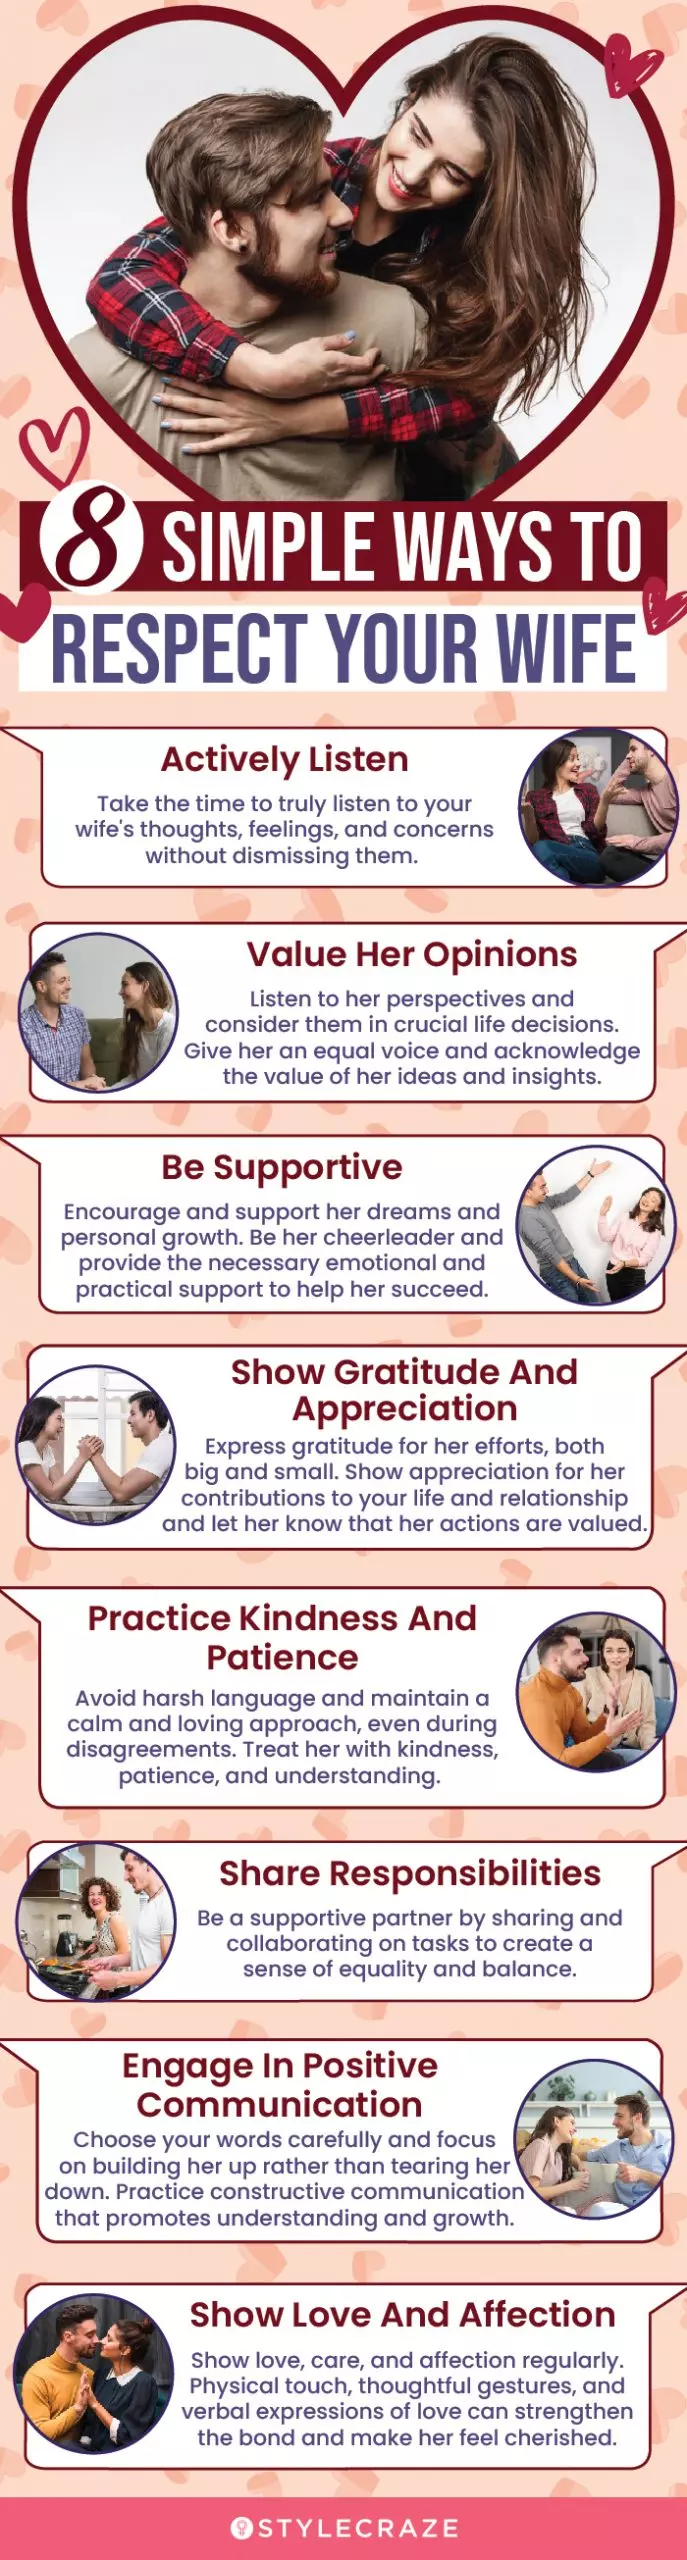 8 simple ways to respect your wife (infographic)